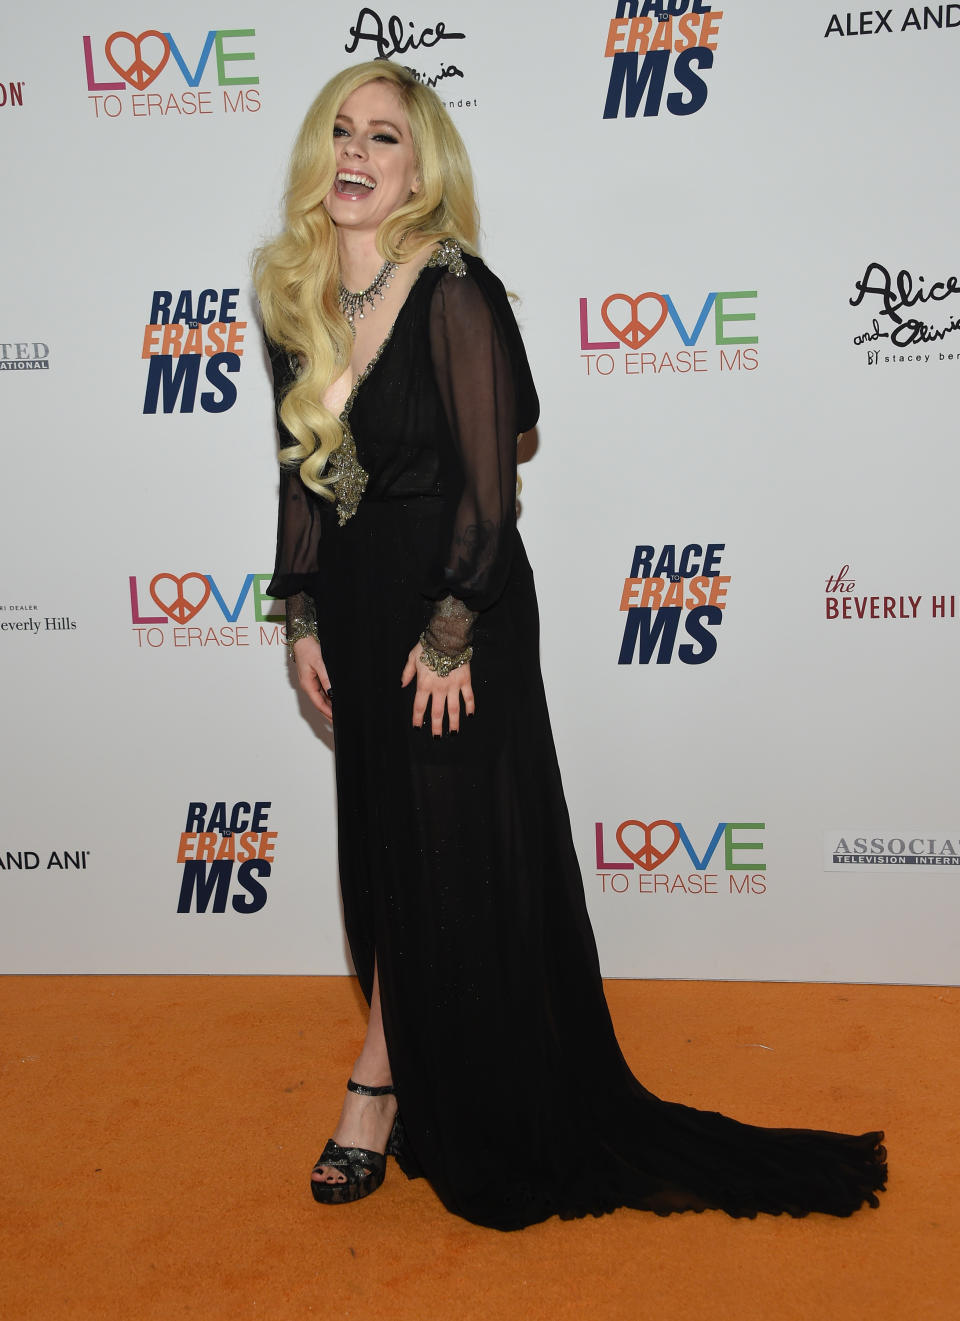 Avril Lavigne at the 25th Annual Race to Erase MS Gala at the Beverly Hilton hotel in Beverly Hills, on April 20 (Photo: Chris Delmas/AFP/Getty Images)